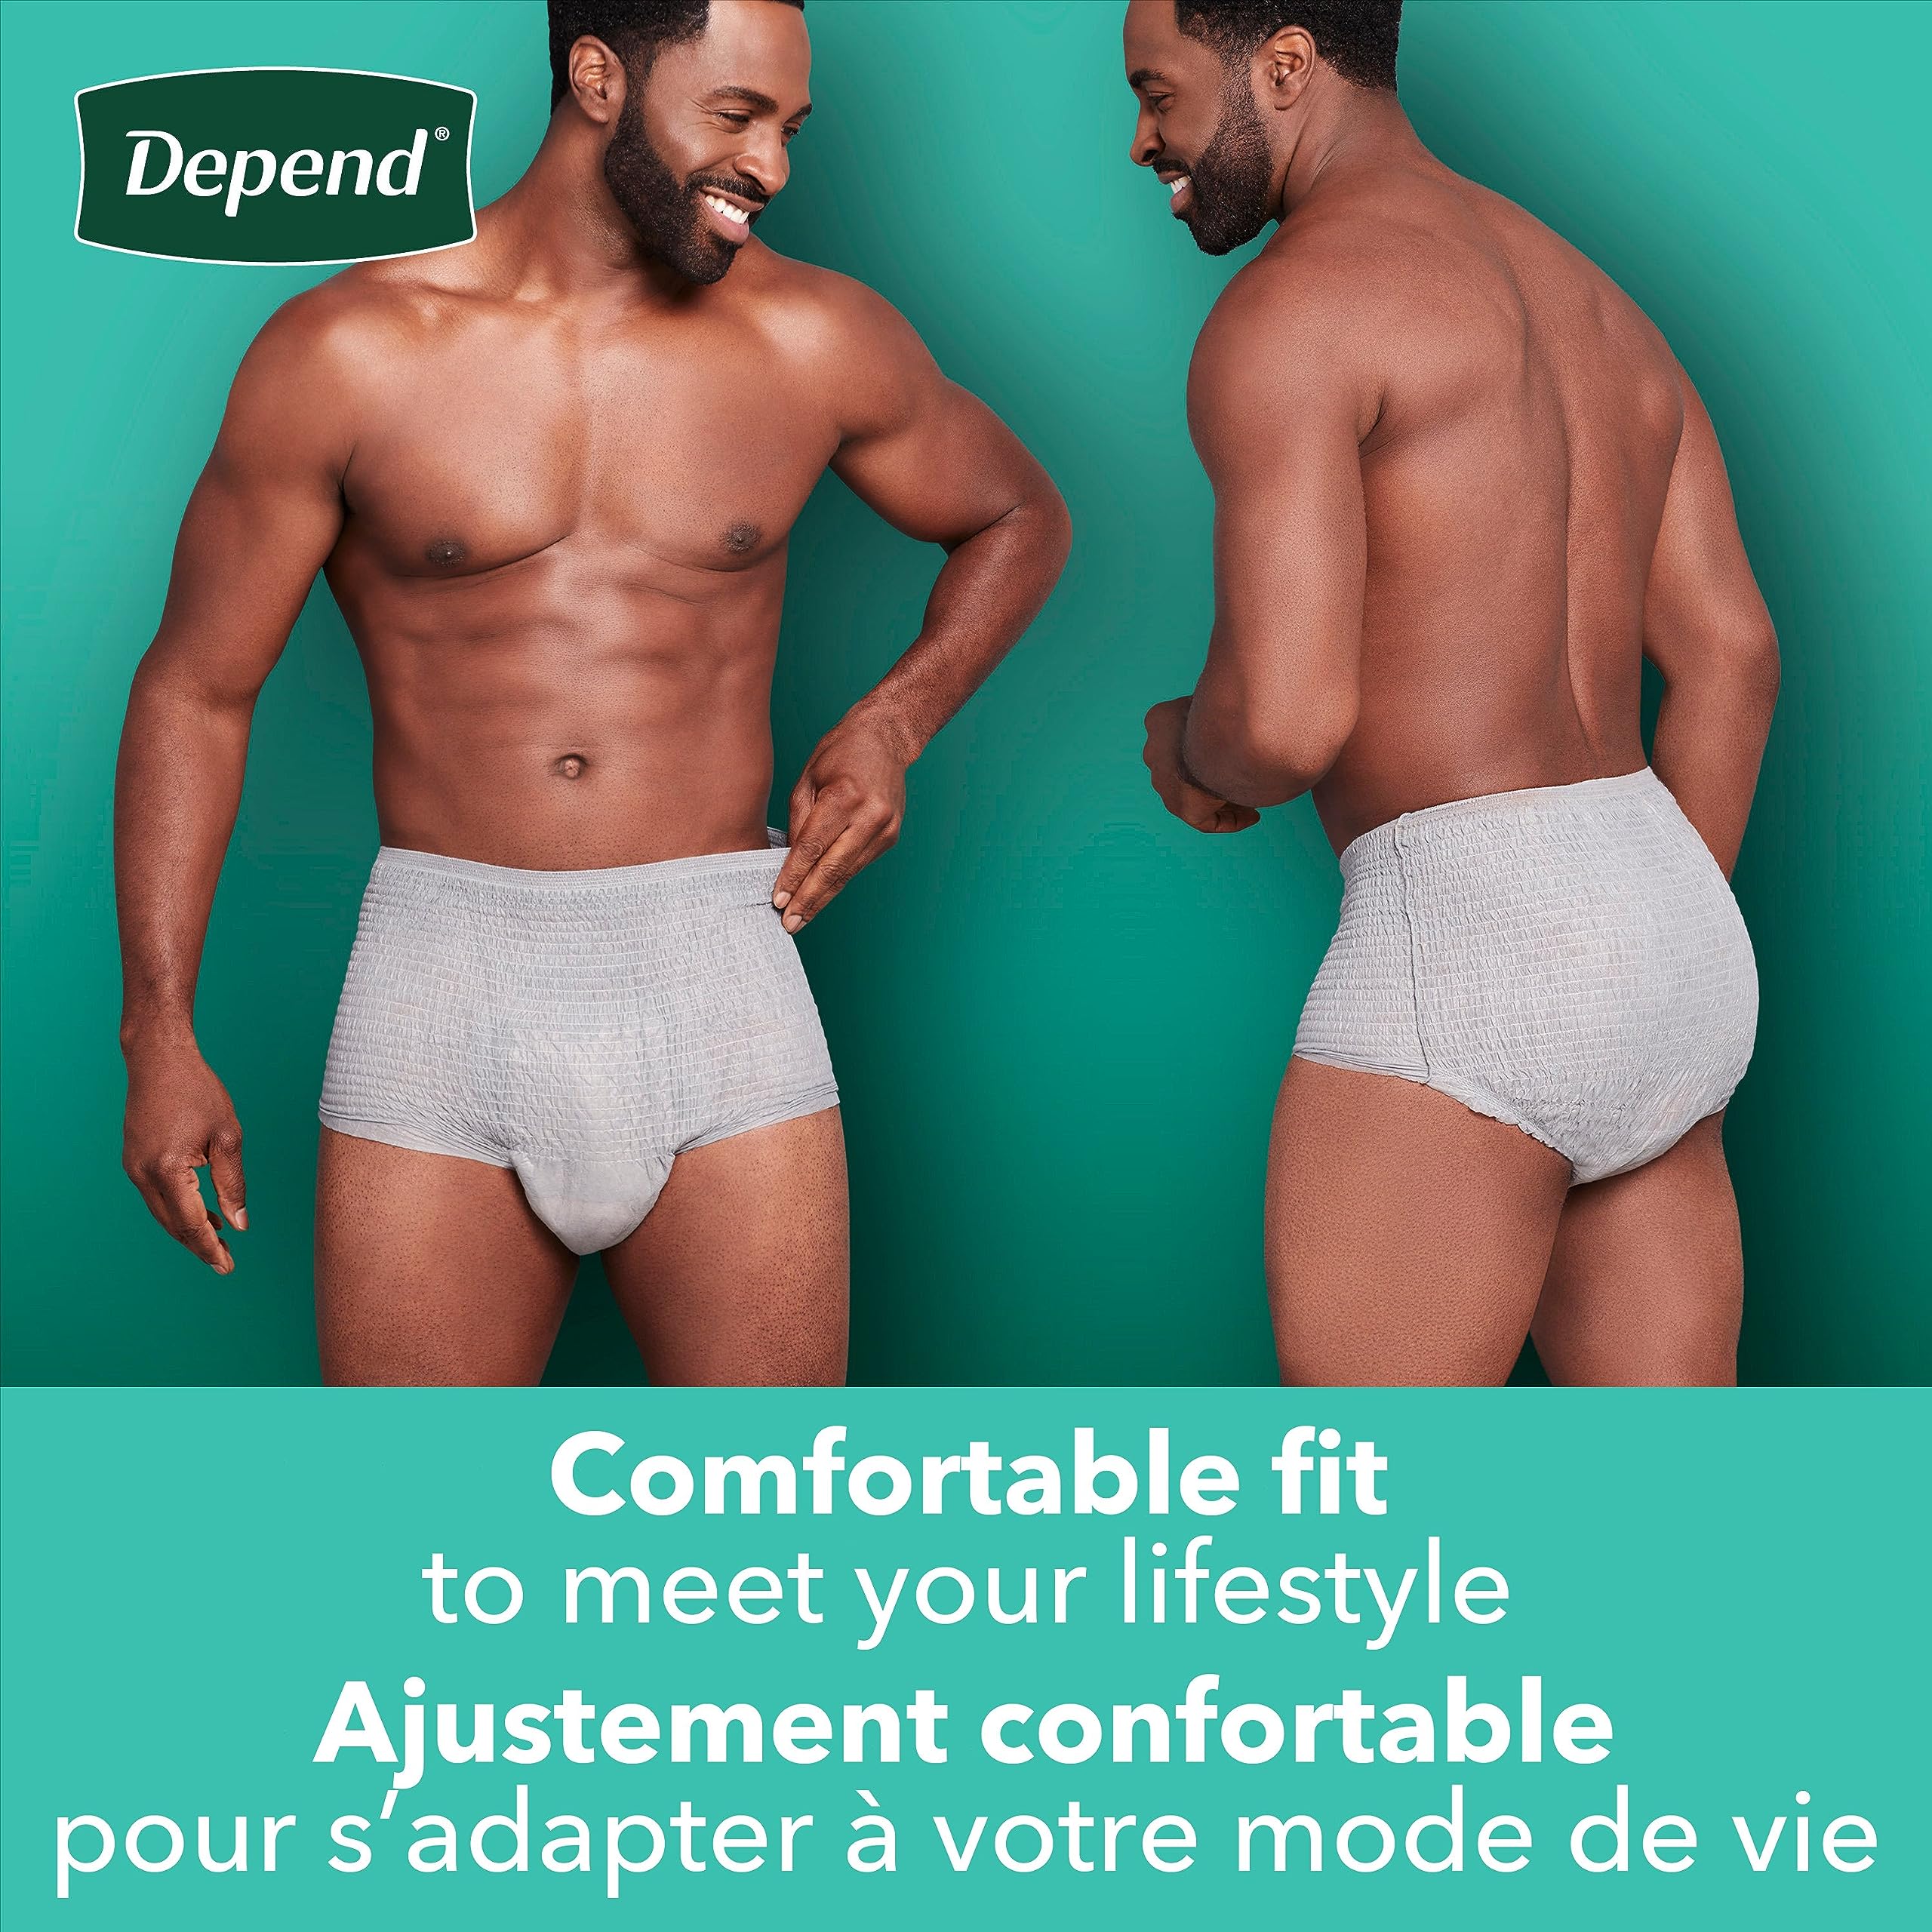 Depend Fresh Protection Adult Incontinence Underwear for Men (Formerly Depend Fit-Flex), Disposable, Maximum, Small/Medium, Grey, 80 Count, Packaging May Vary